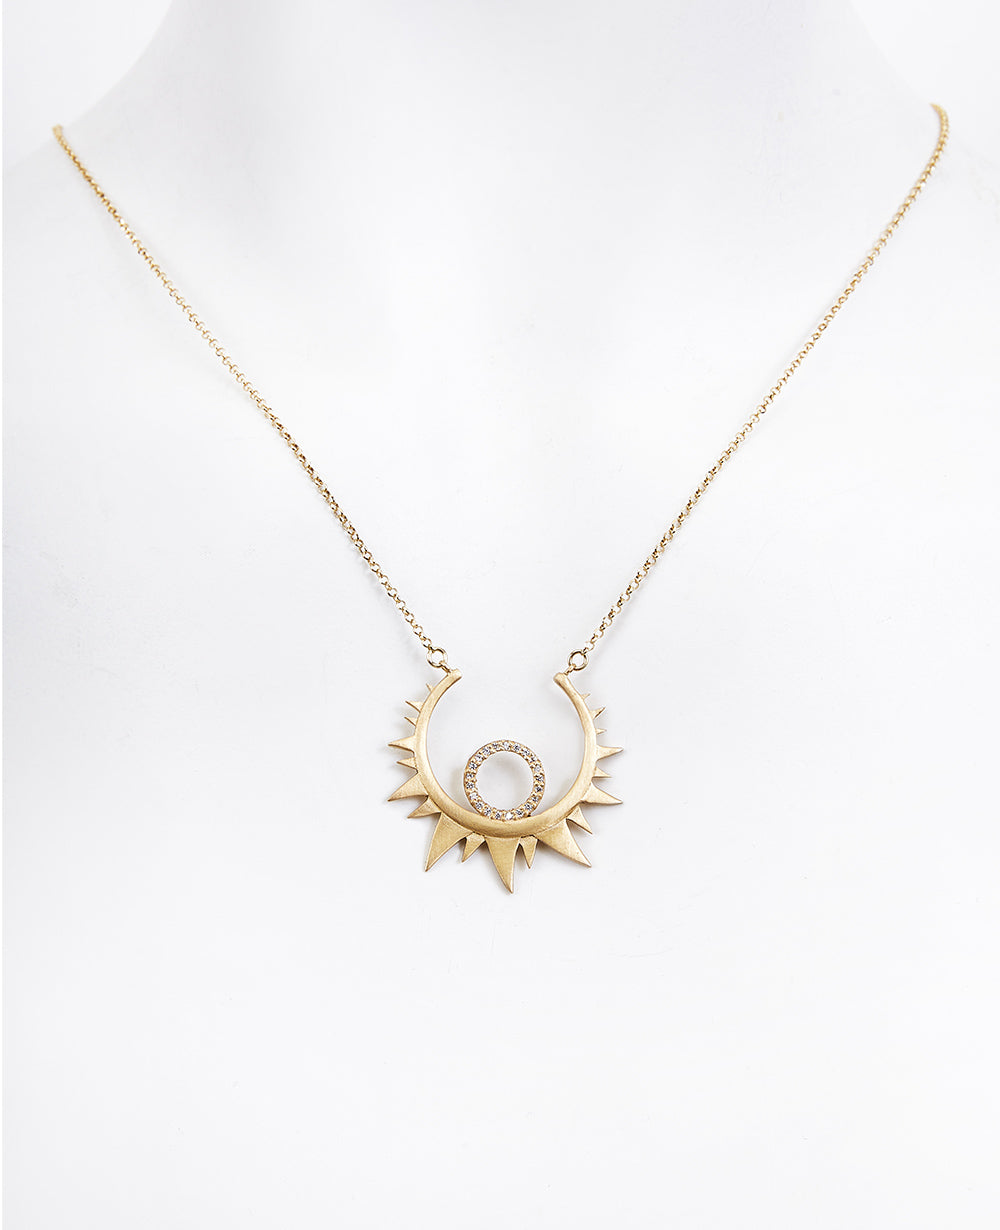 NECKLACE "NEL SOLE" GOLD